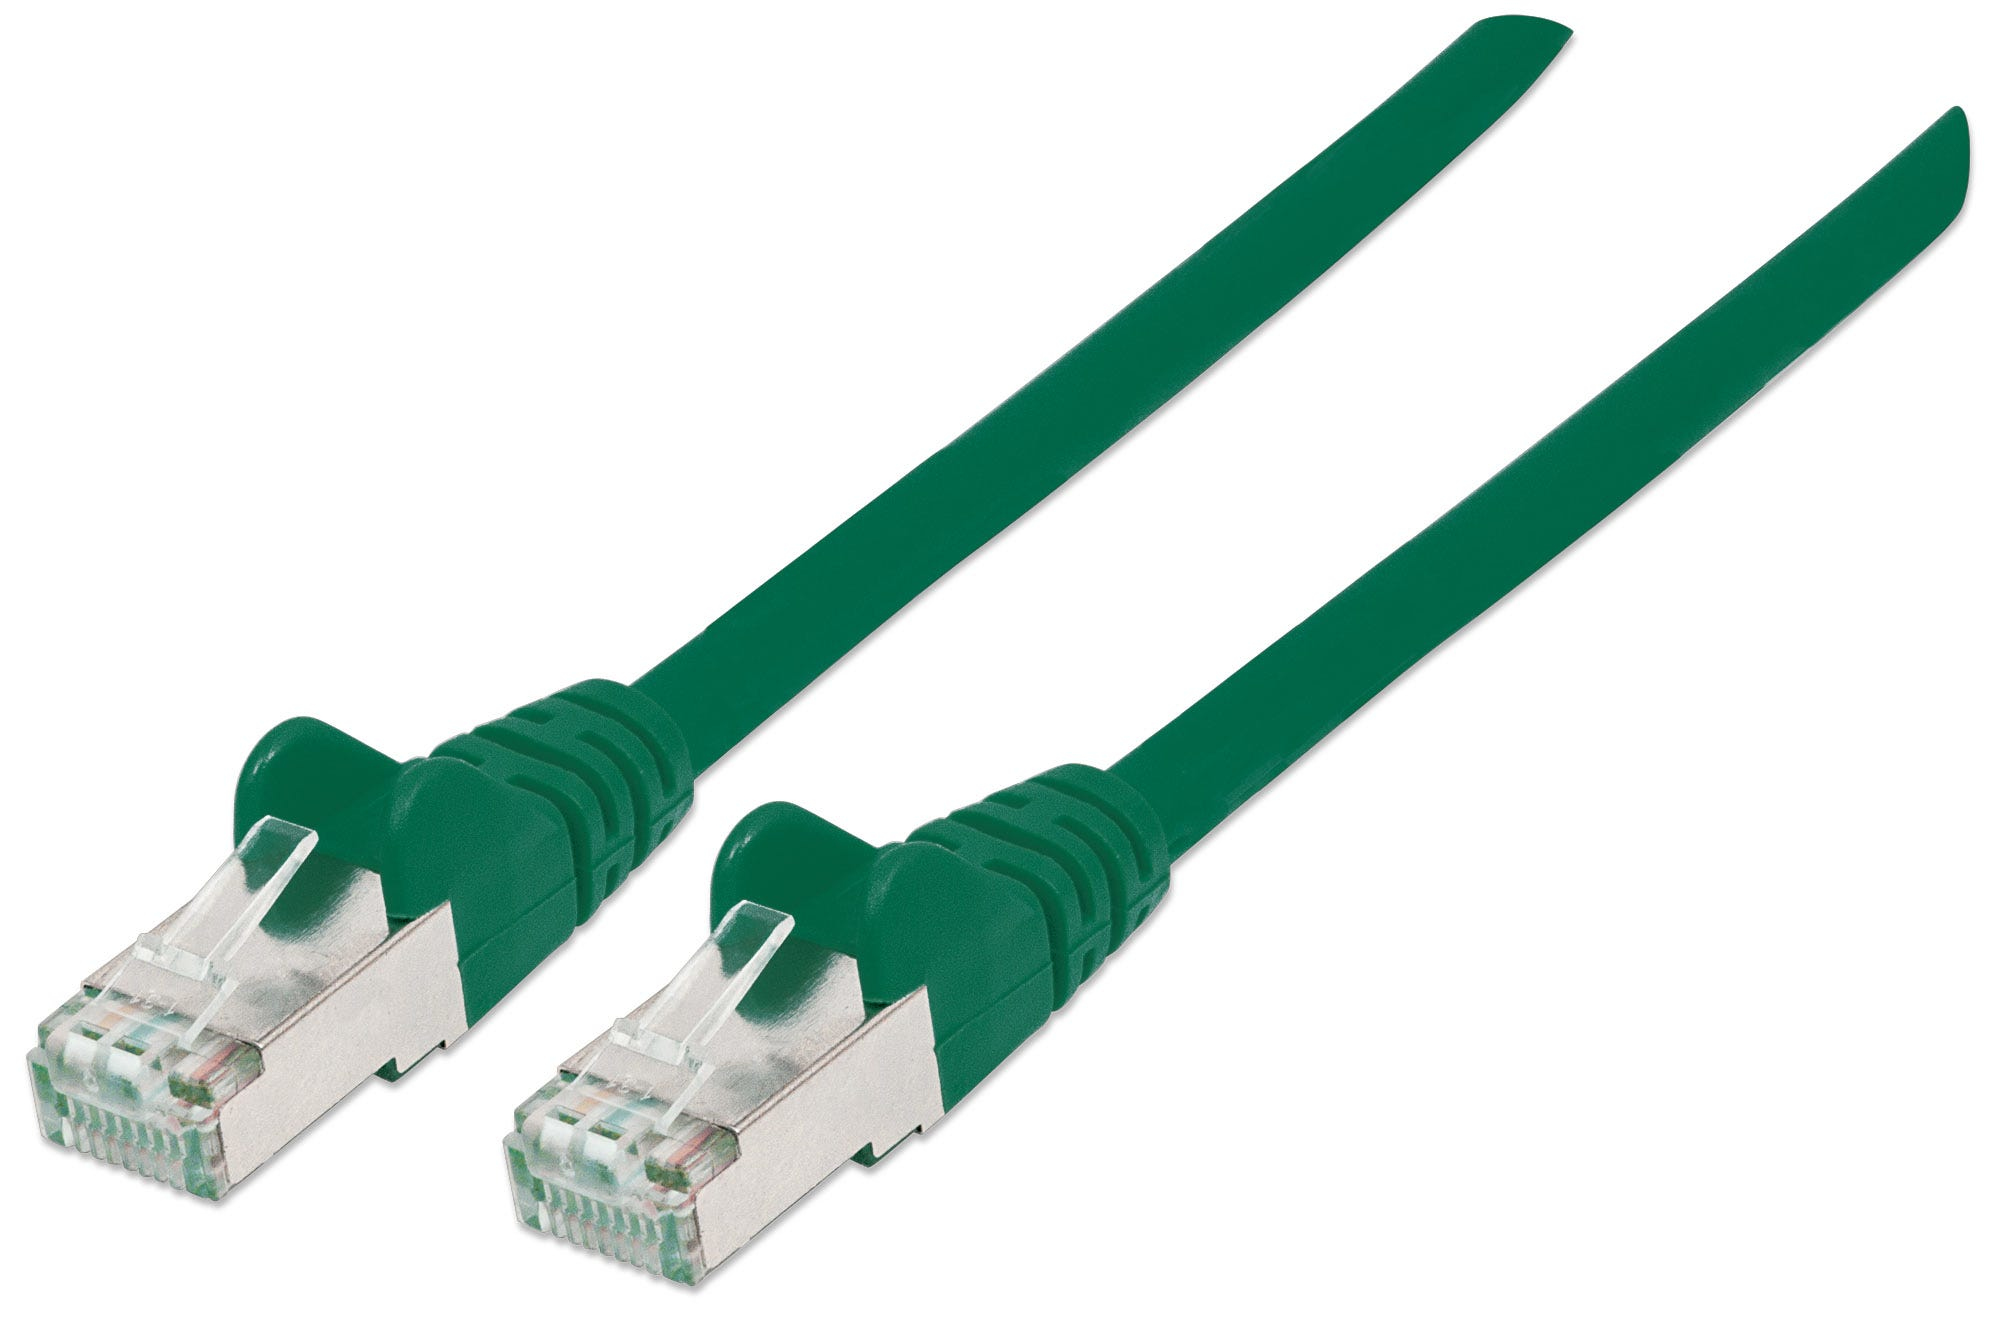 Intellinet Network Patch Cable, Cat6A, 1m, Green, Copper, S/FTP, LSOH / LSZH, PVC, RJ45, Gold Plated Contacts, Snagless, Booted, Polybag - Patch-Kabel (DTE)